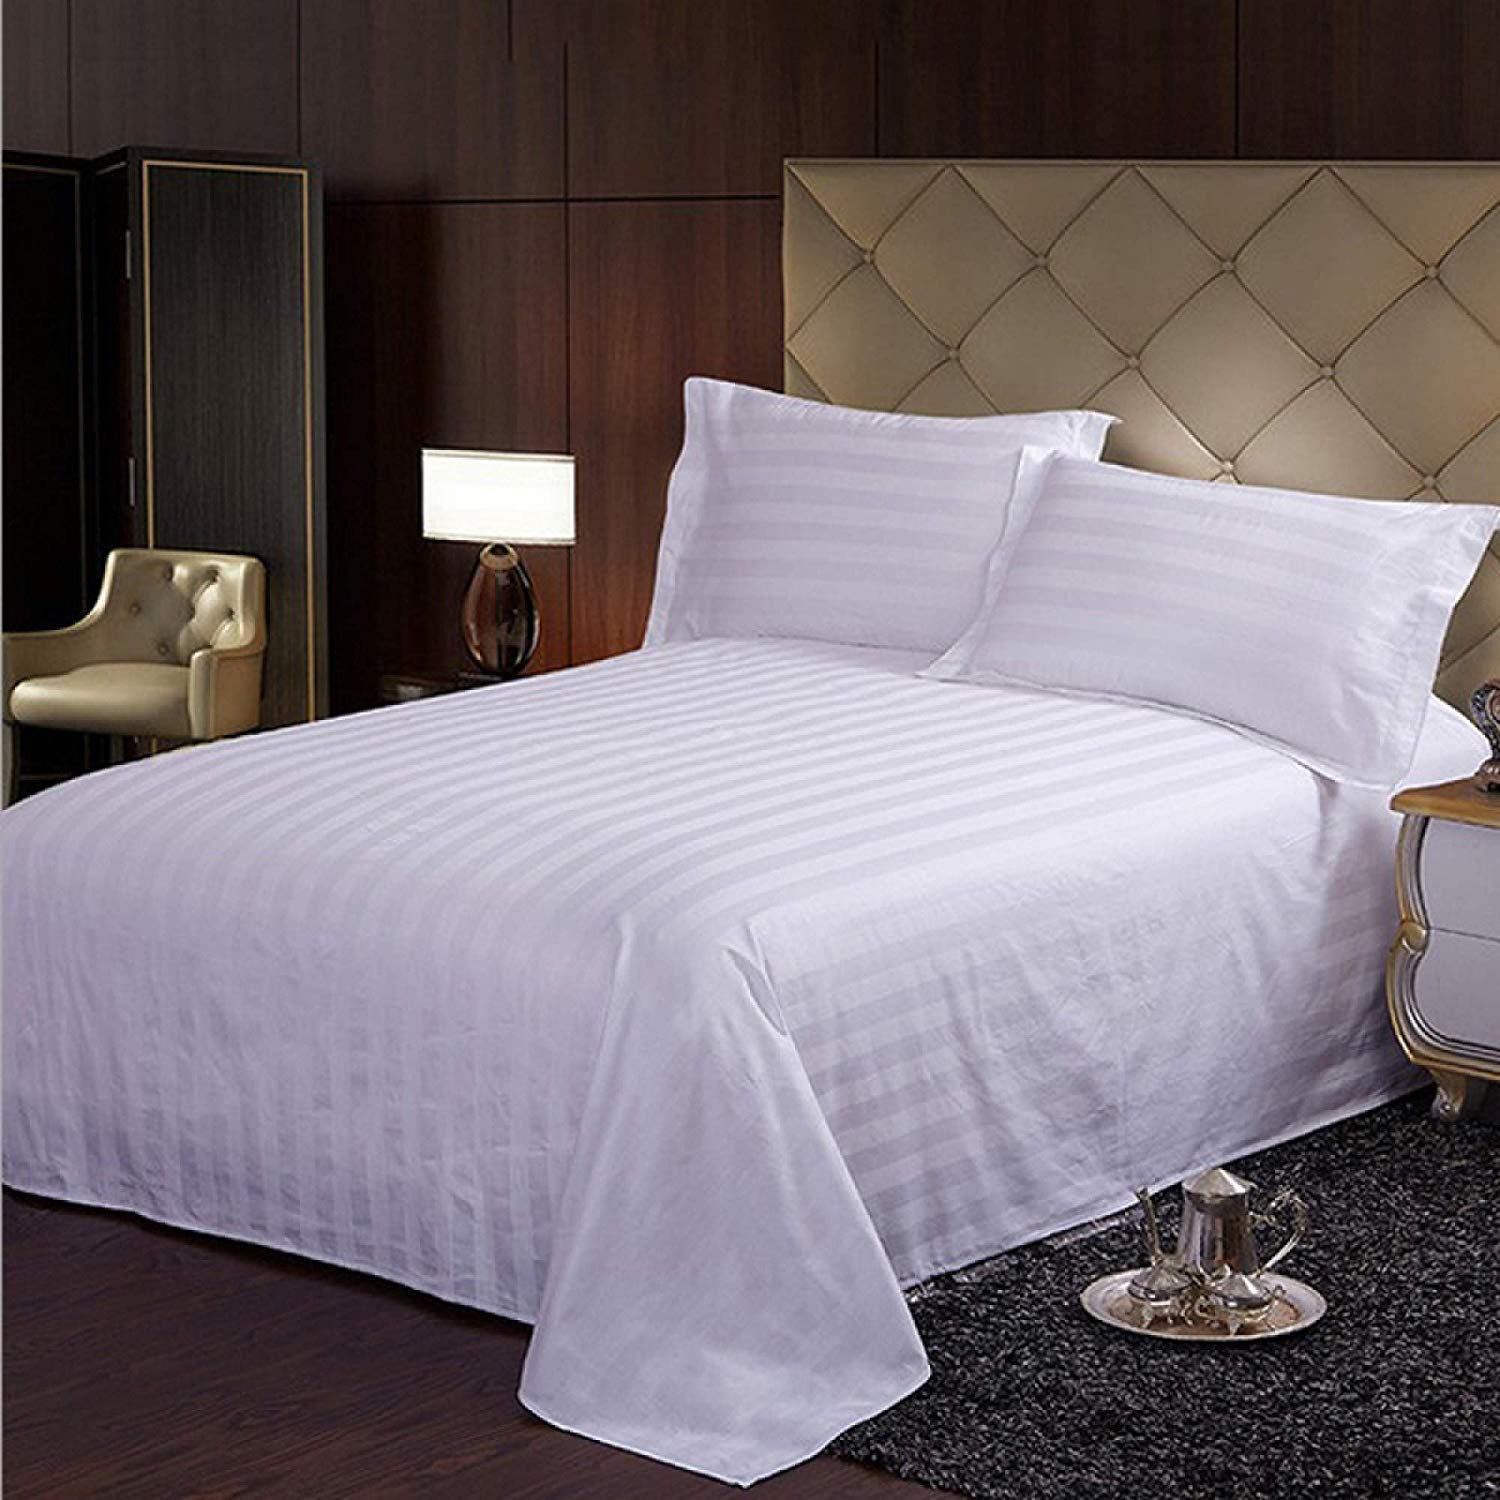 Kuber Industries Double Bedsheet with 2 Pillow Covers|Cotton Material & Satin Stripes|Size 254 x 228 CM (White)